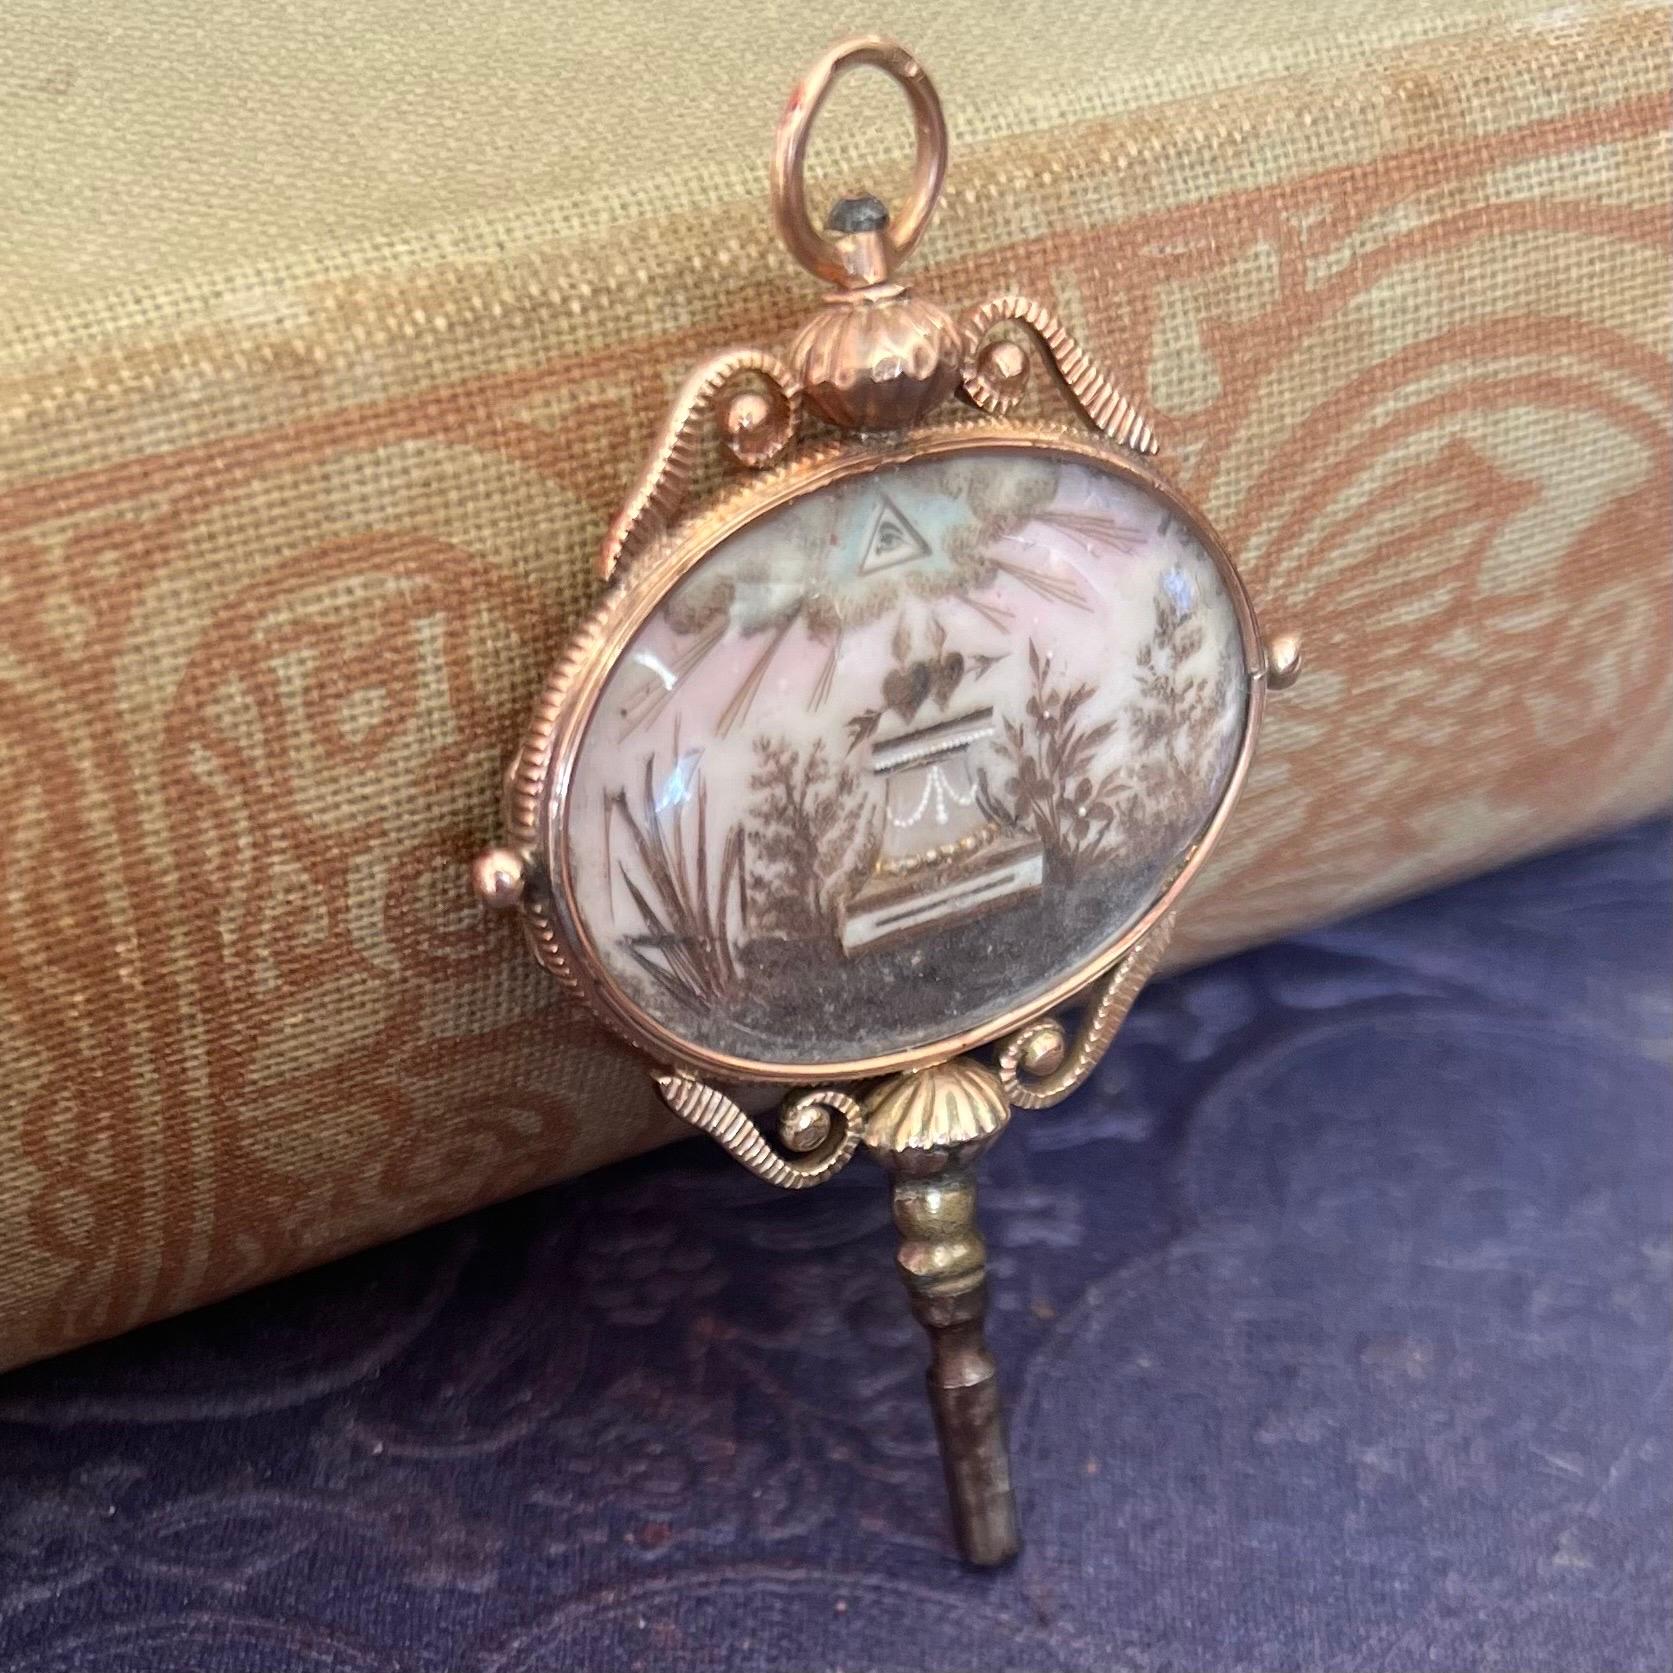 An exceptional antique Georgian pocket watch key, made of pink gold. The pink gold key is decorated and surrounded by detailed hollow curled figures on its border which features delicate decorative engravings on both sides. For the presentation